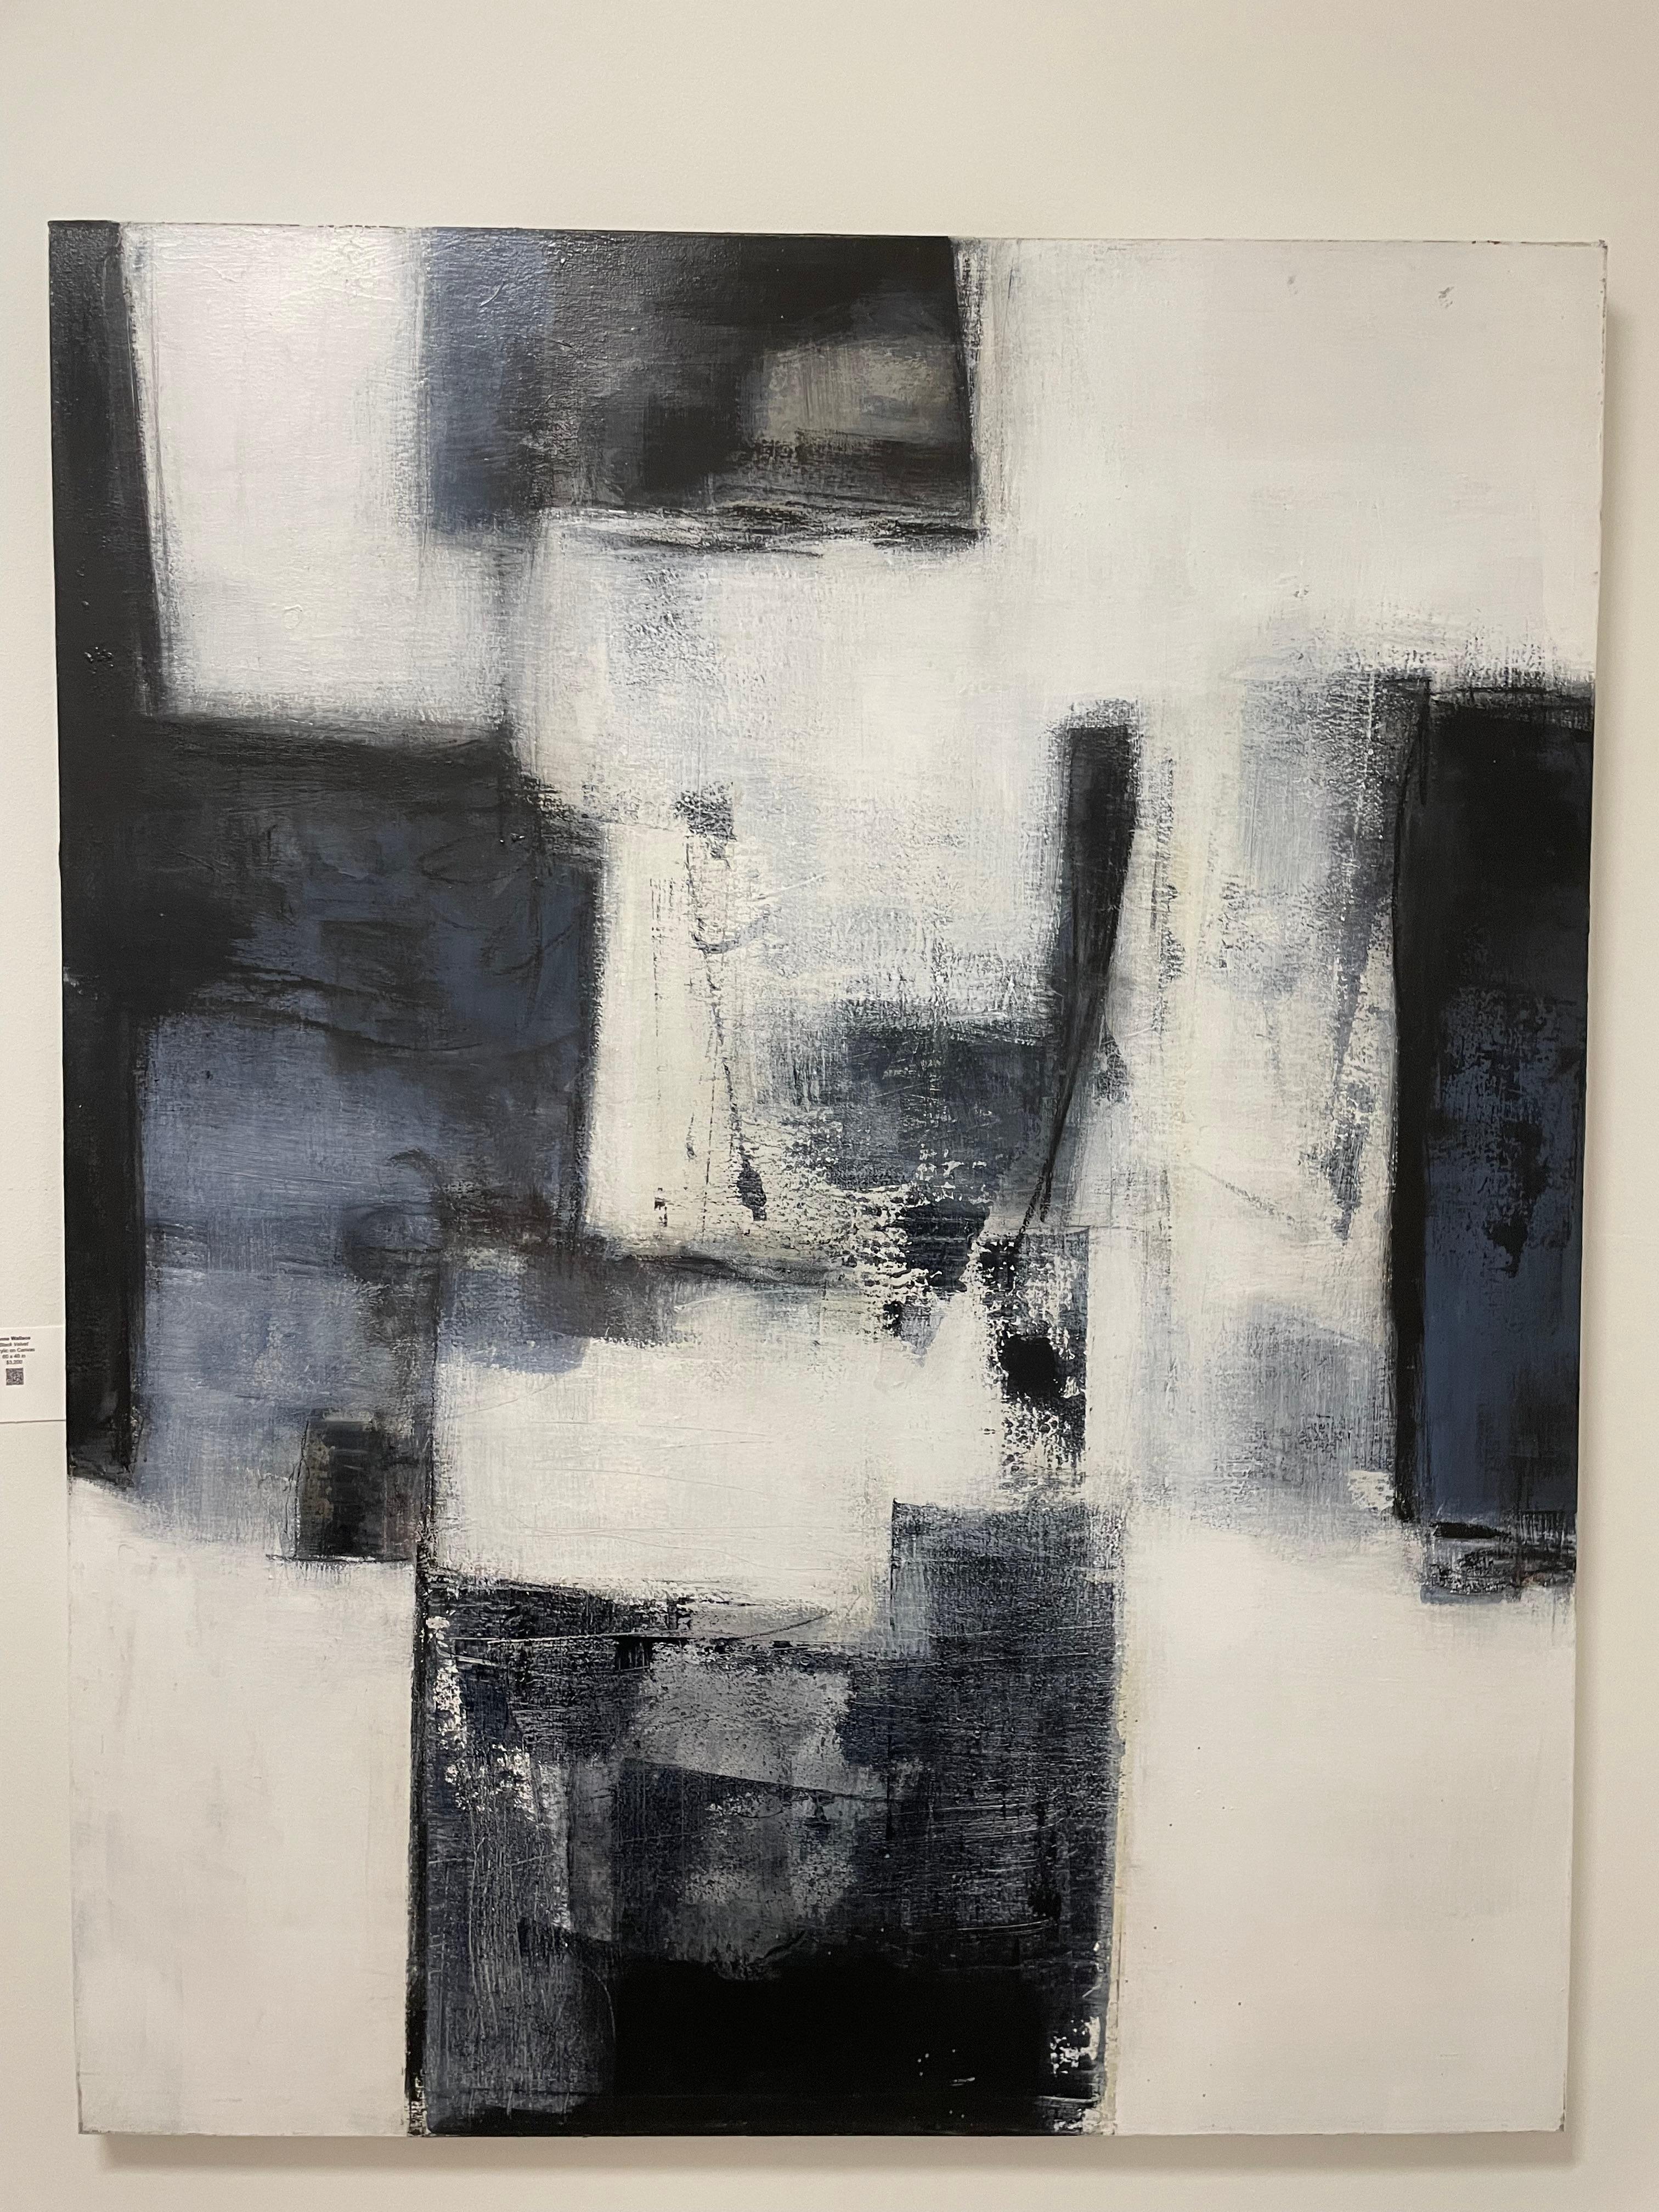 This abstract piece by Anne Wallace is made of acrylic paint on canvas, and is 60 x 48 inches. It is priced at $3,200. Wallace's works seek to convey a sense of serenity, which is conveyed here with her gestural, color field style, as well as her